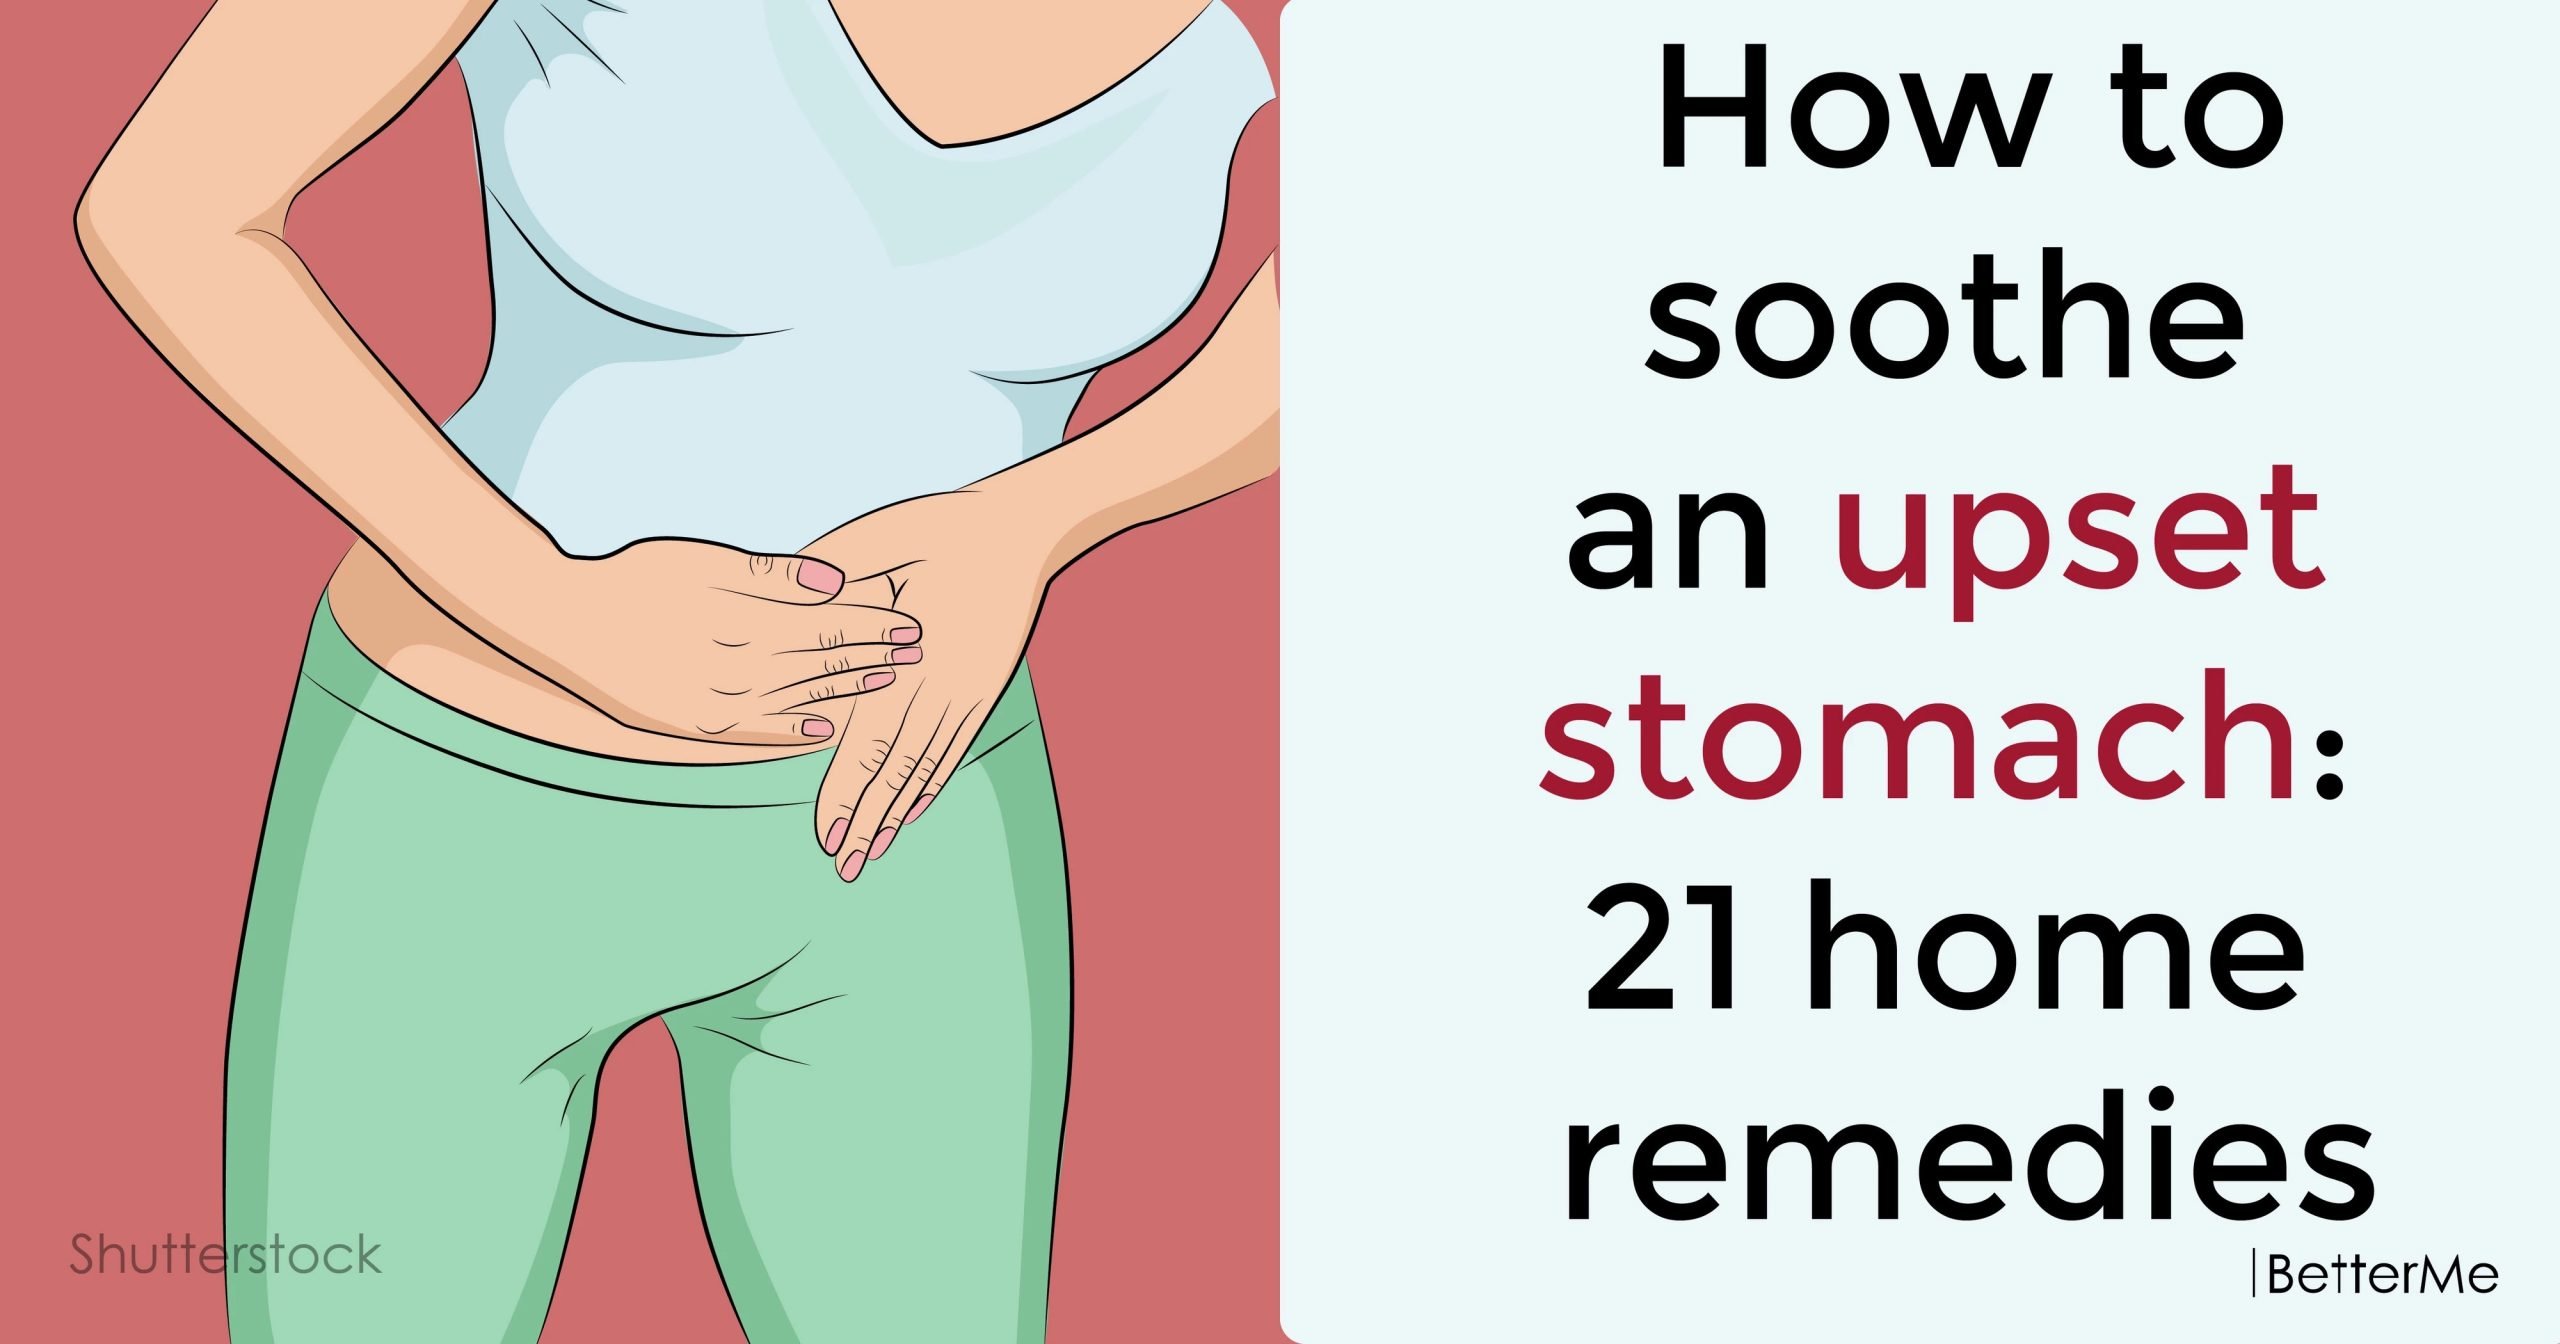 How to soothe an upset stomach: 21 home remedies